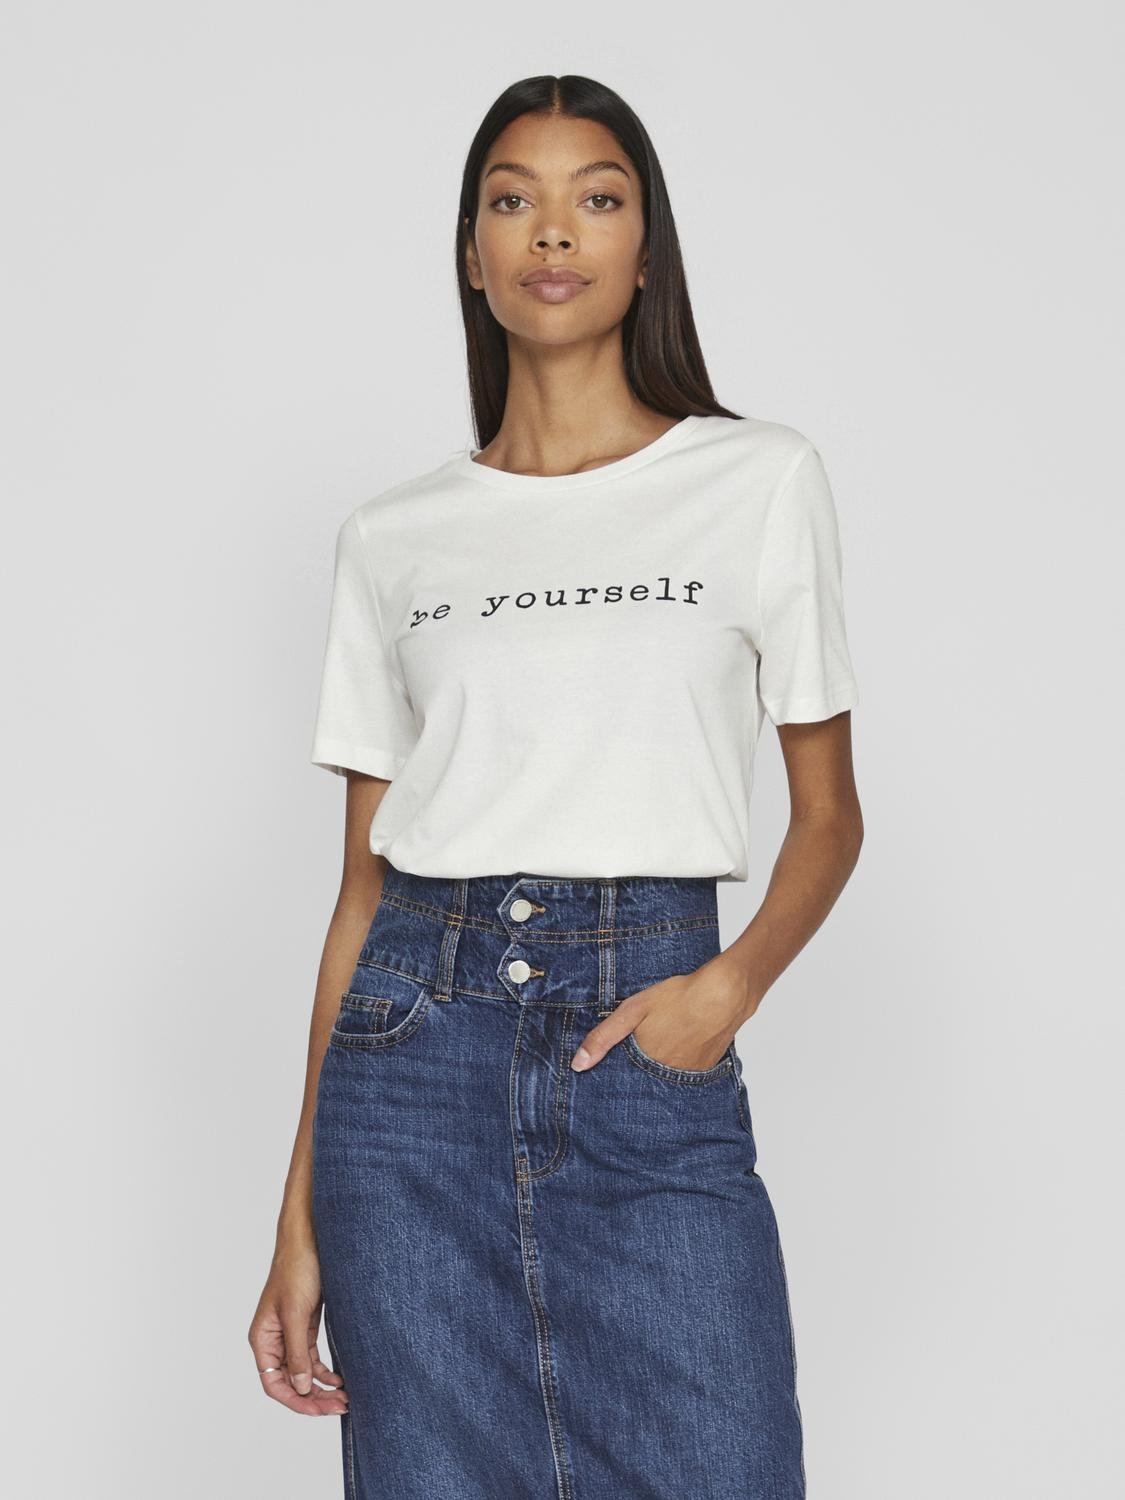 BE YOURSELF T-SHIRT (WHITE/BLACK)